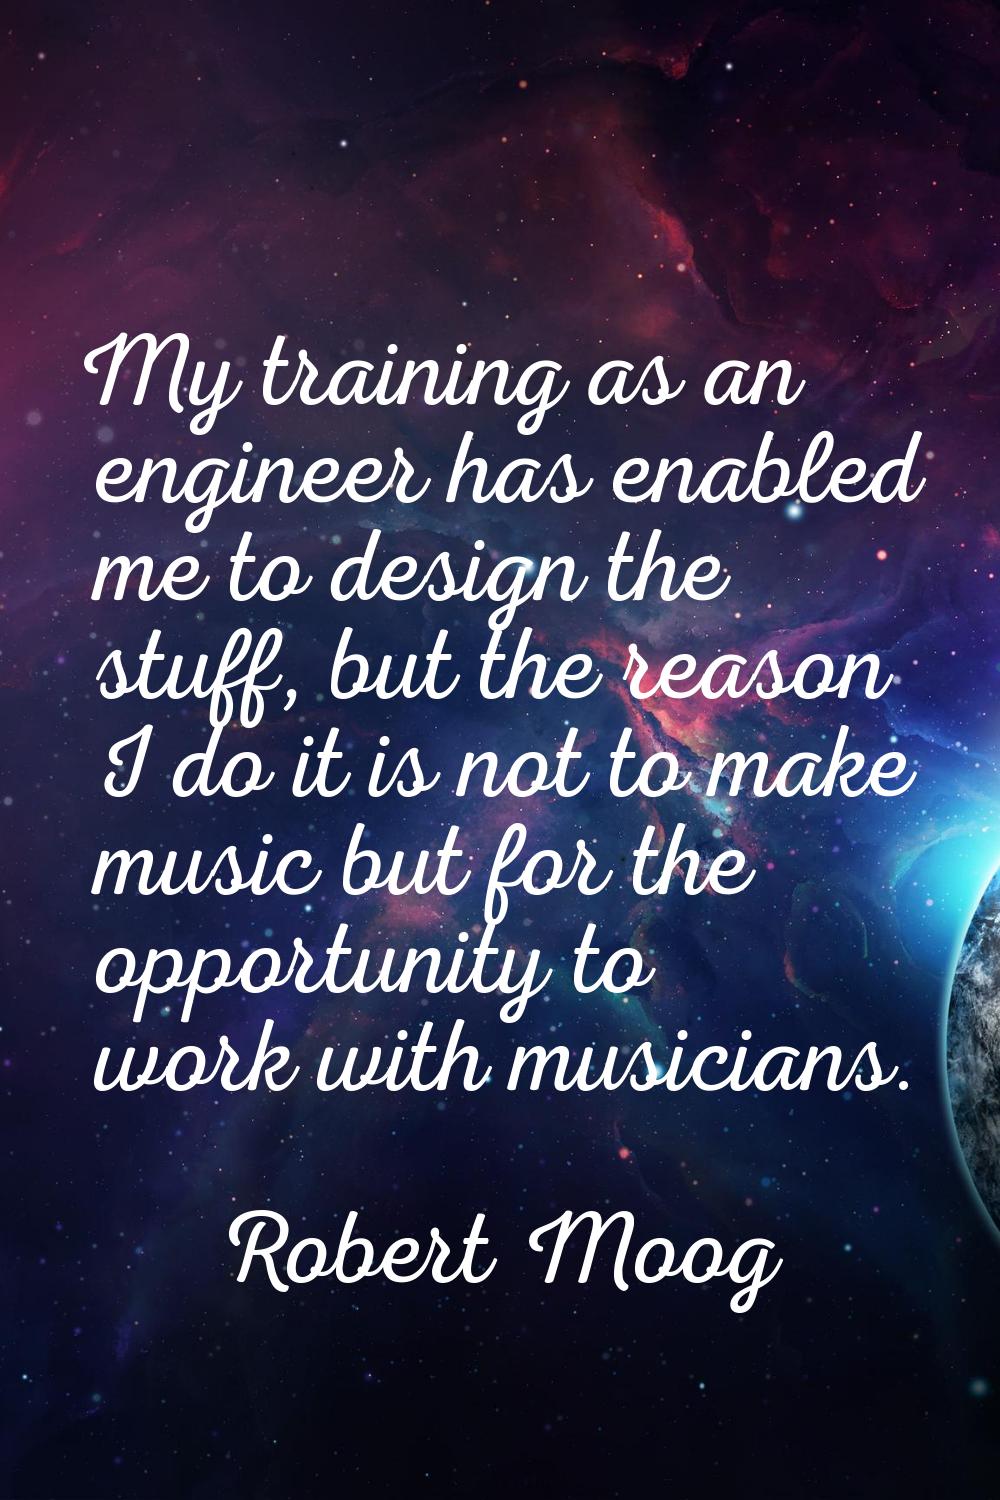 My training as an engineer has enabled me to design the stuff, but the reason I do it is not to mak